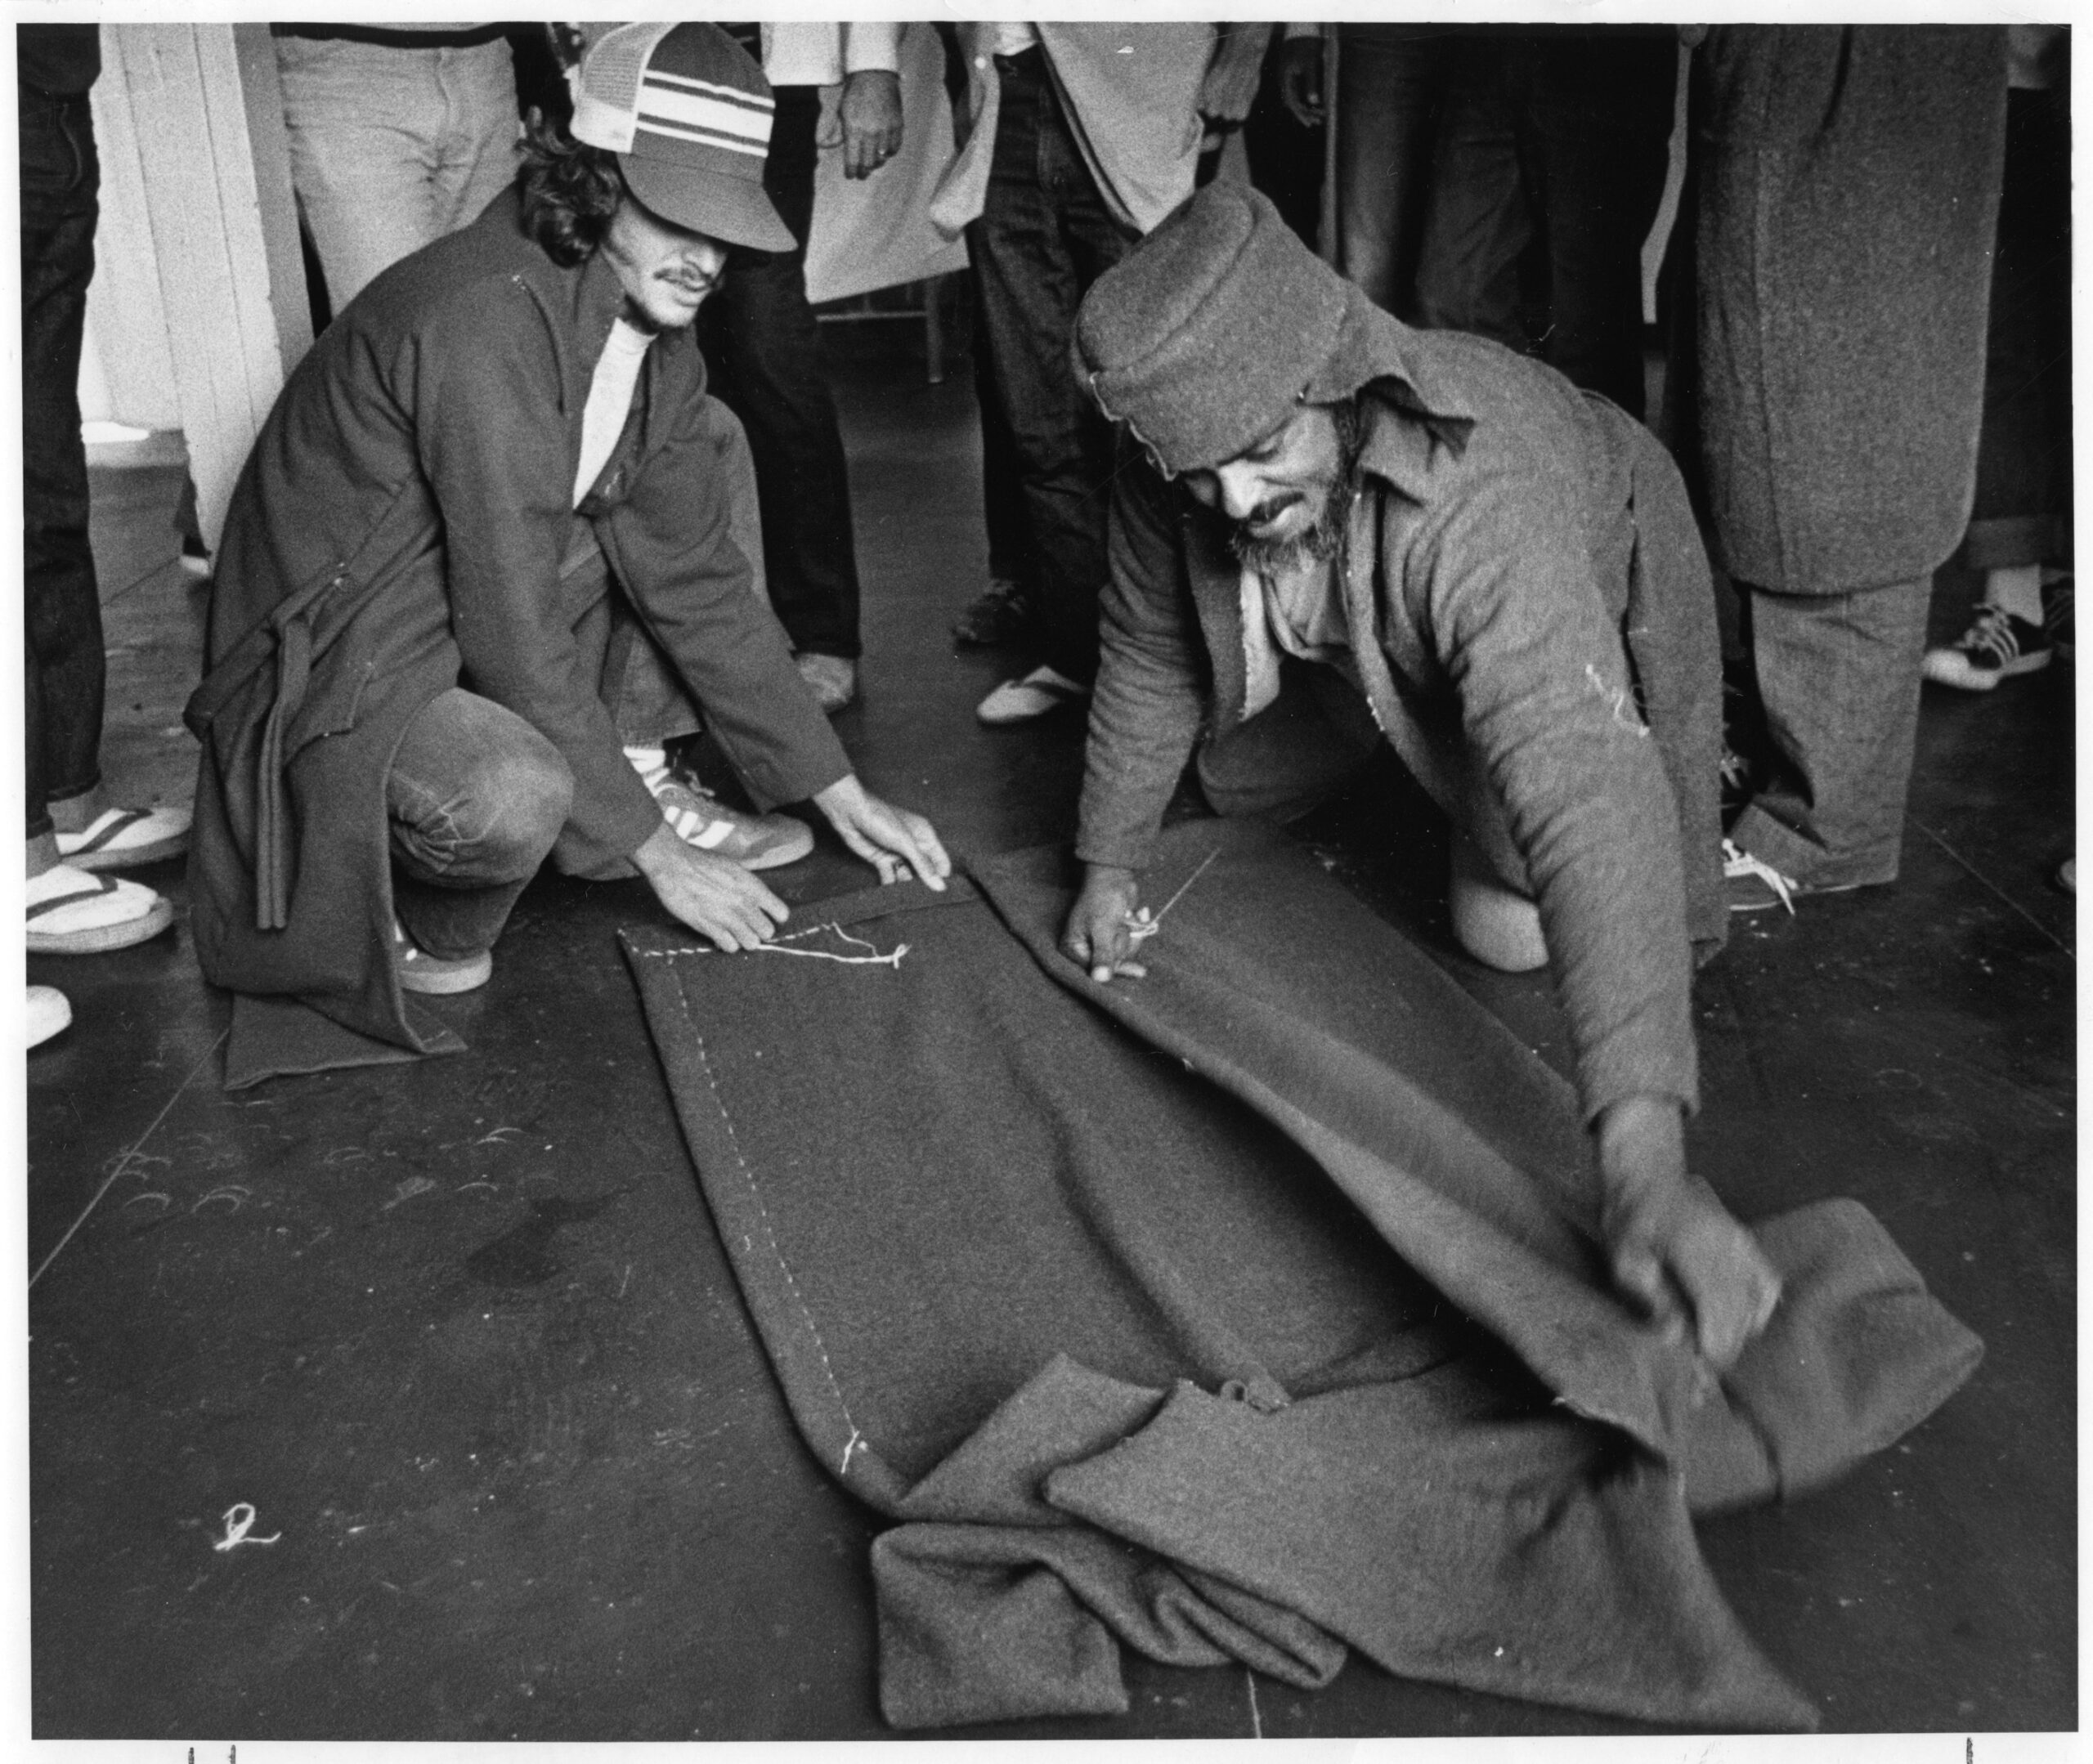 Cuban refugees making coats out of Army blankets